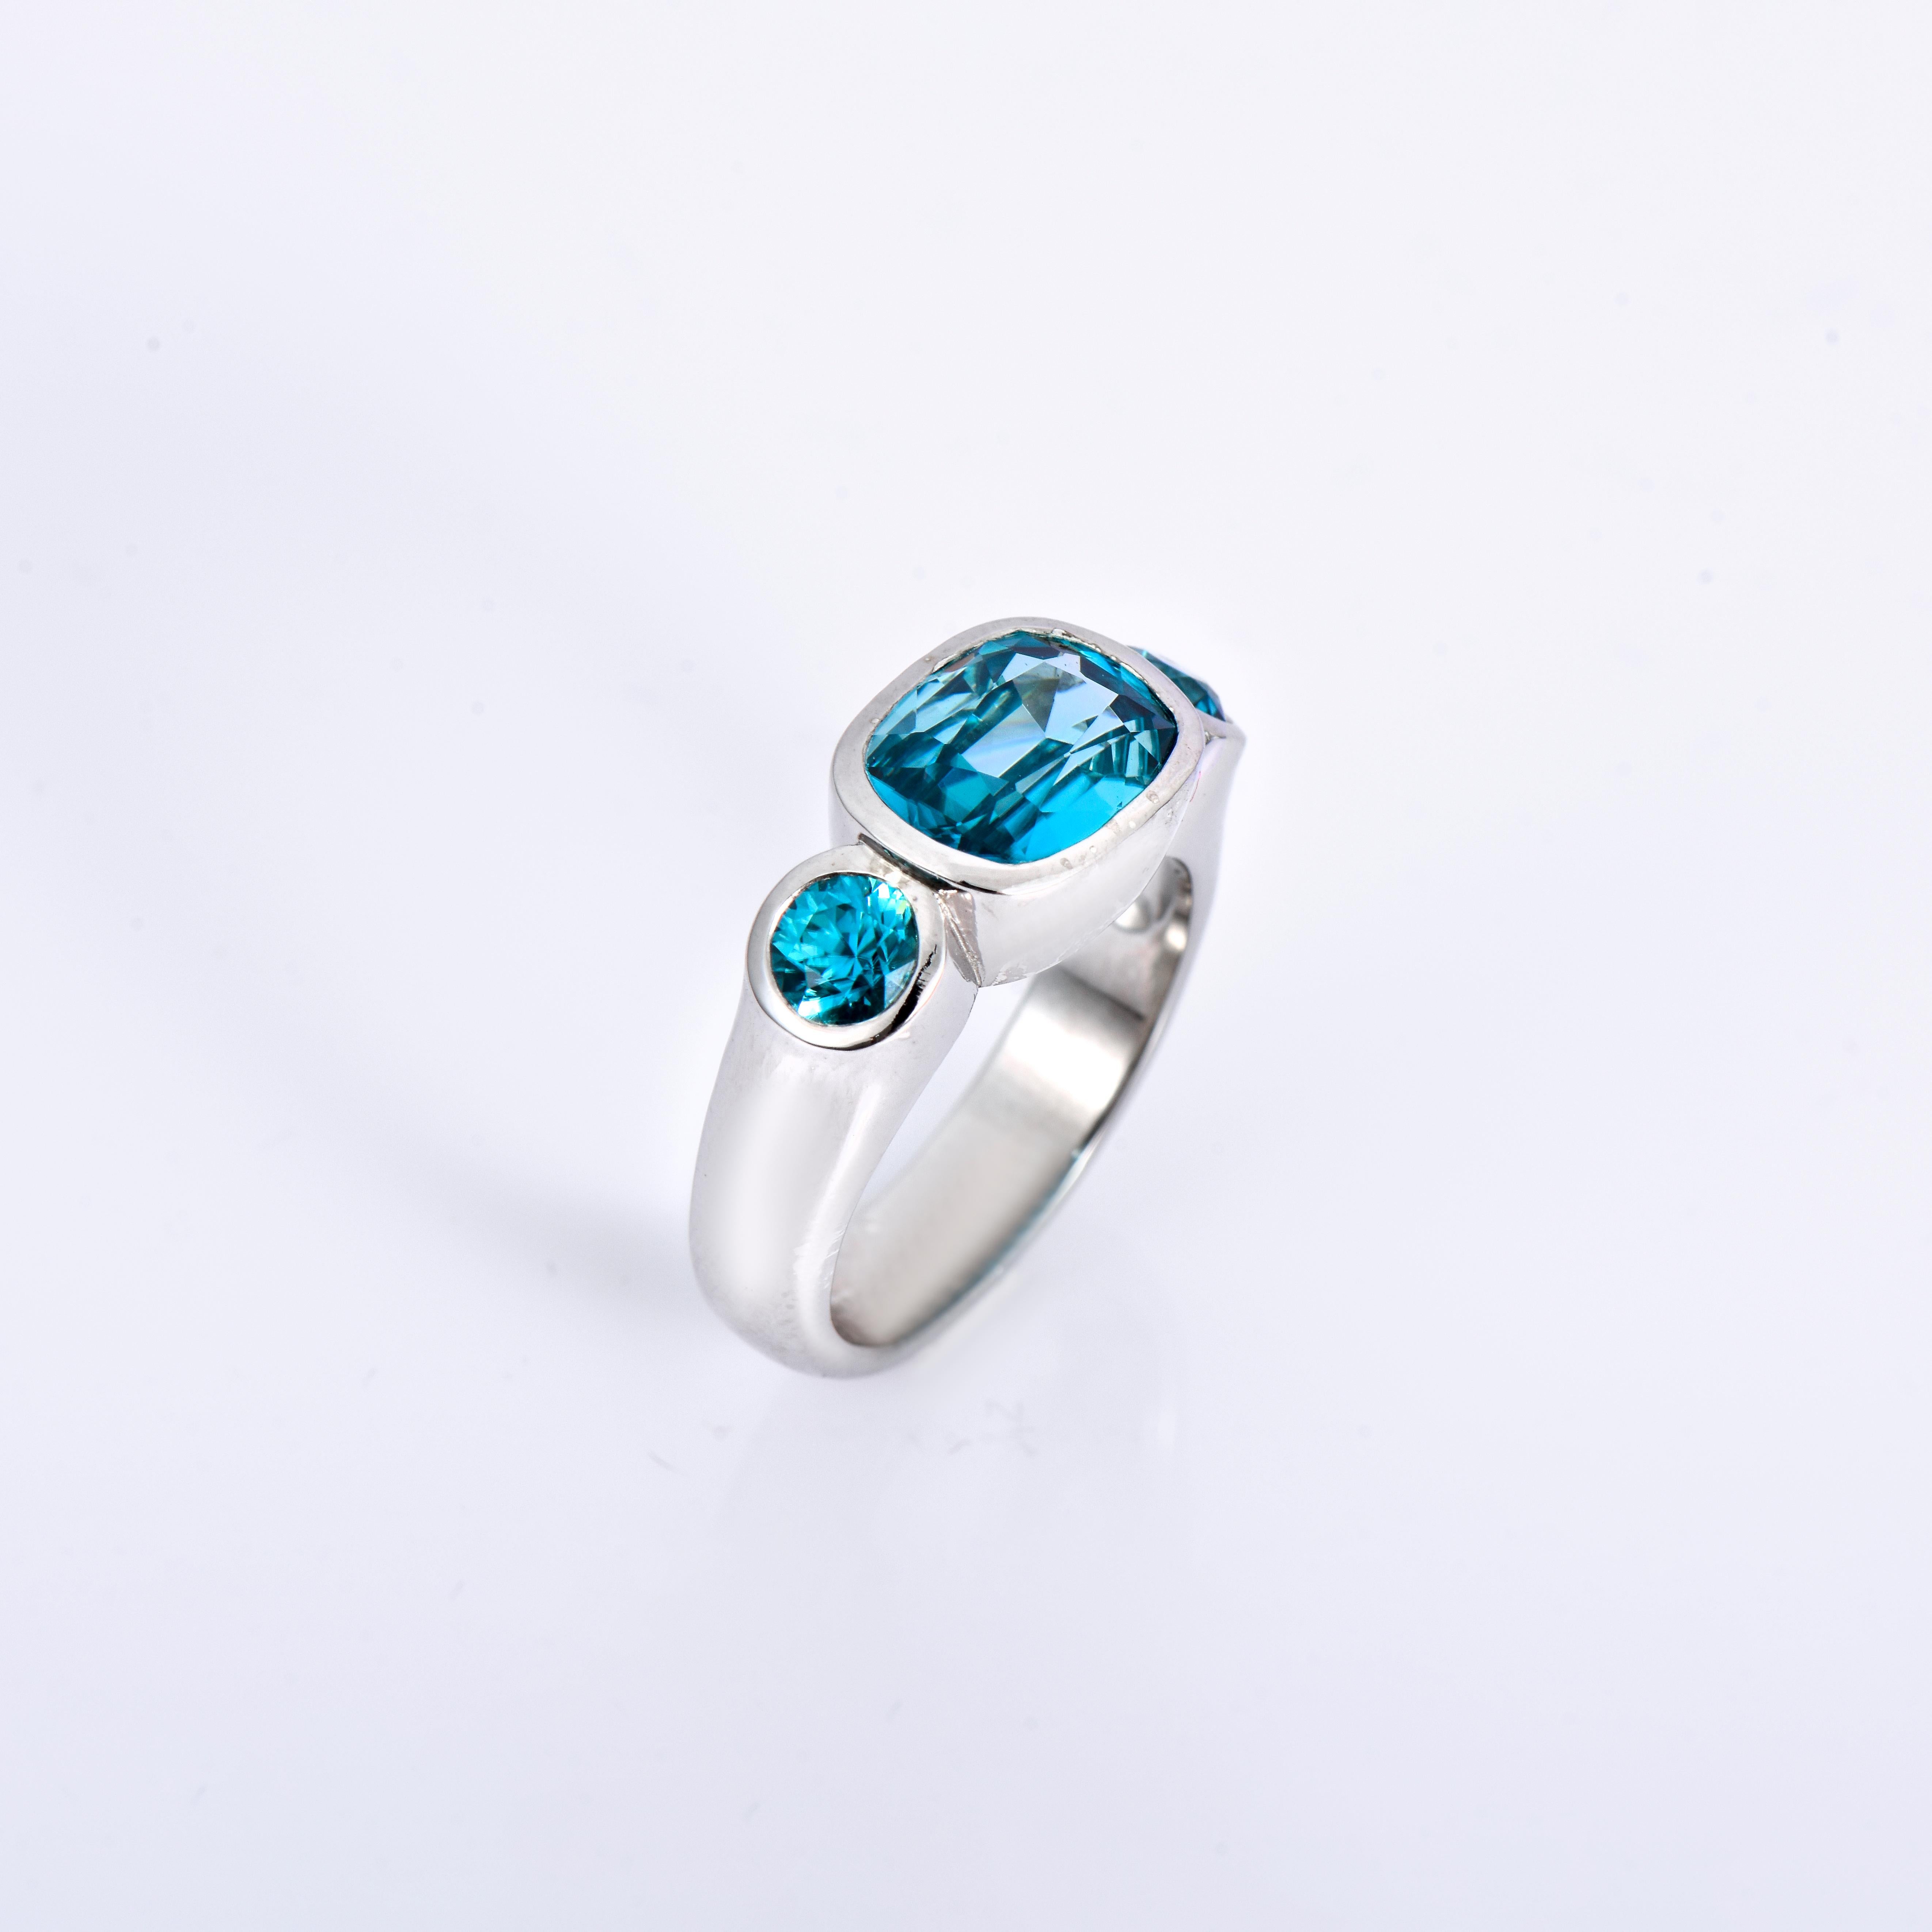 Orloff of Denmark; 925 Sterling Silver Ring set with three Natural Cambodian Blue Zircons totaling to 6.06 carats.

This piece has been meticulously hand-crafted out of 925 sterling silver.
In the center sits a 4.48 carat blue zircon mined, polished